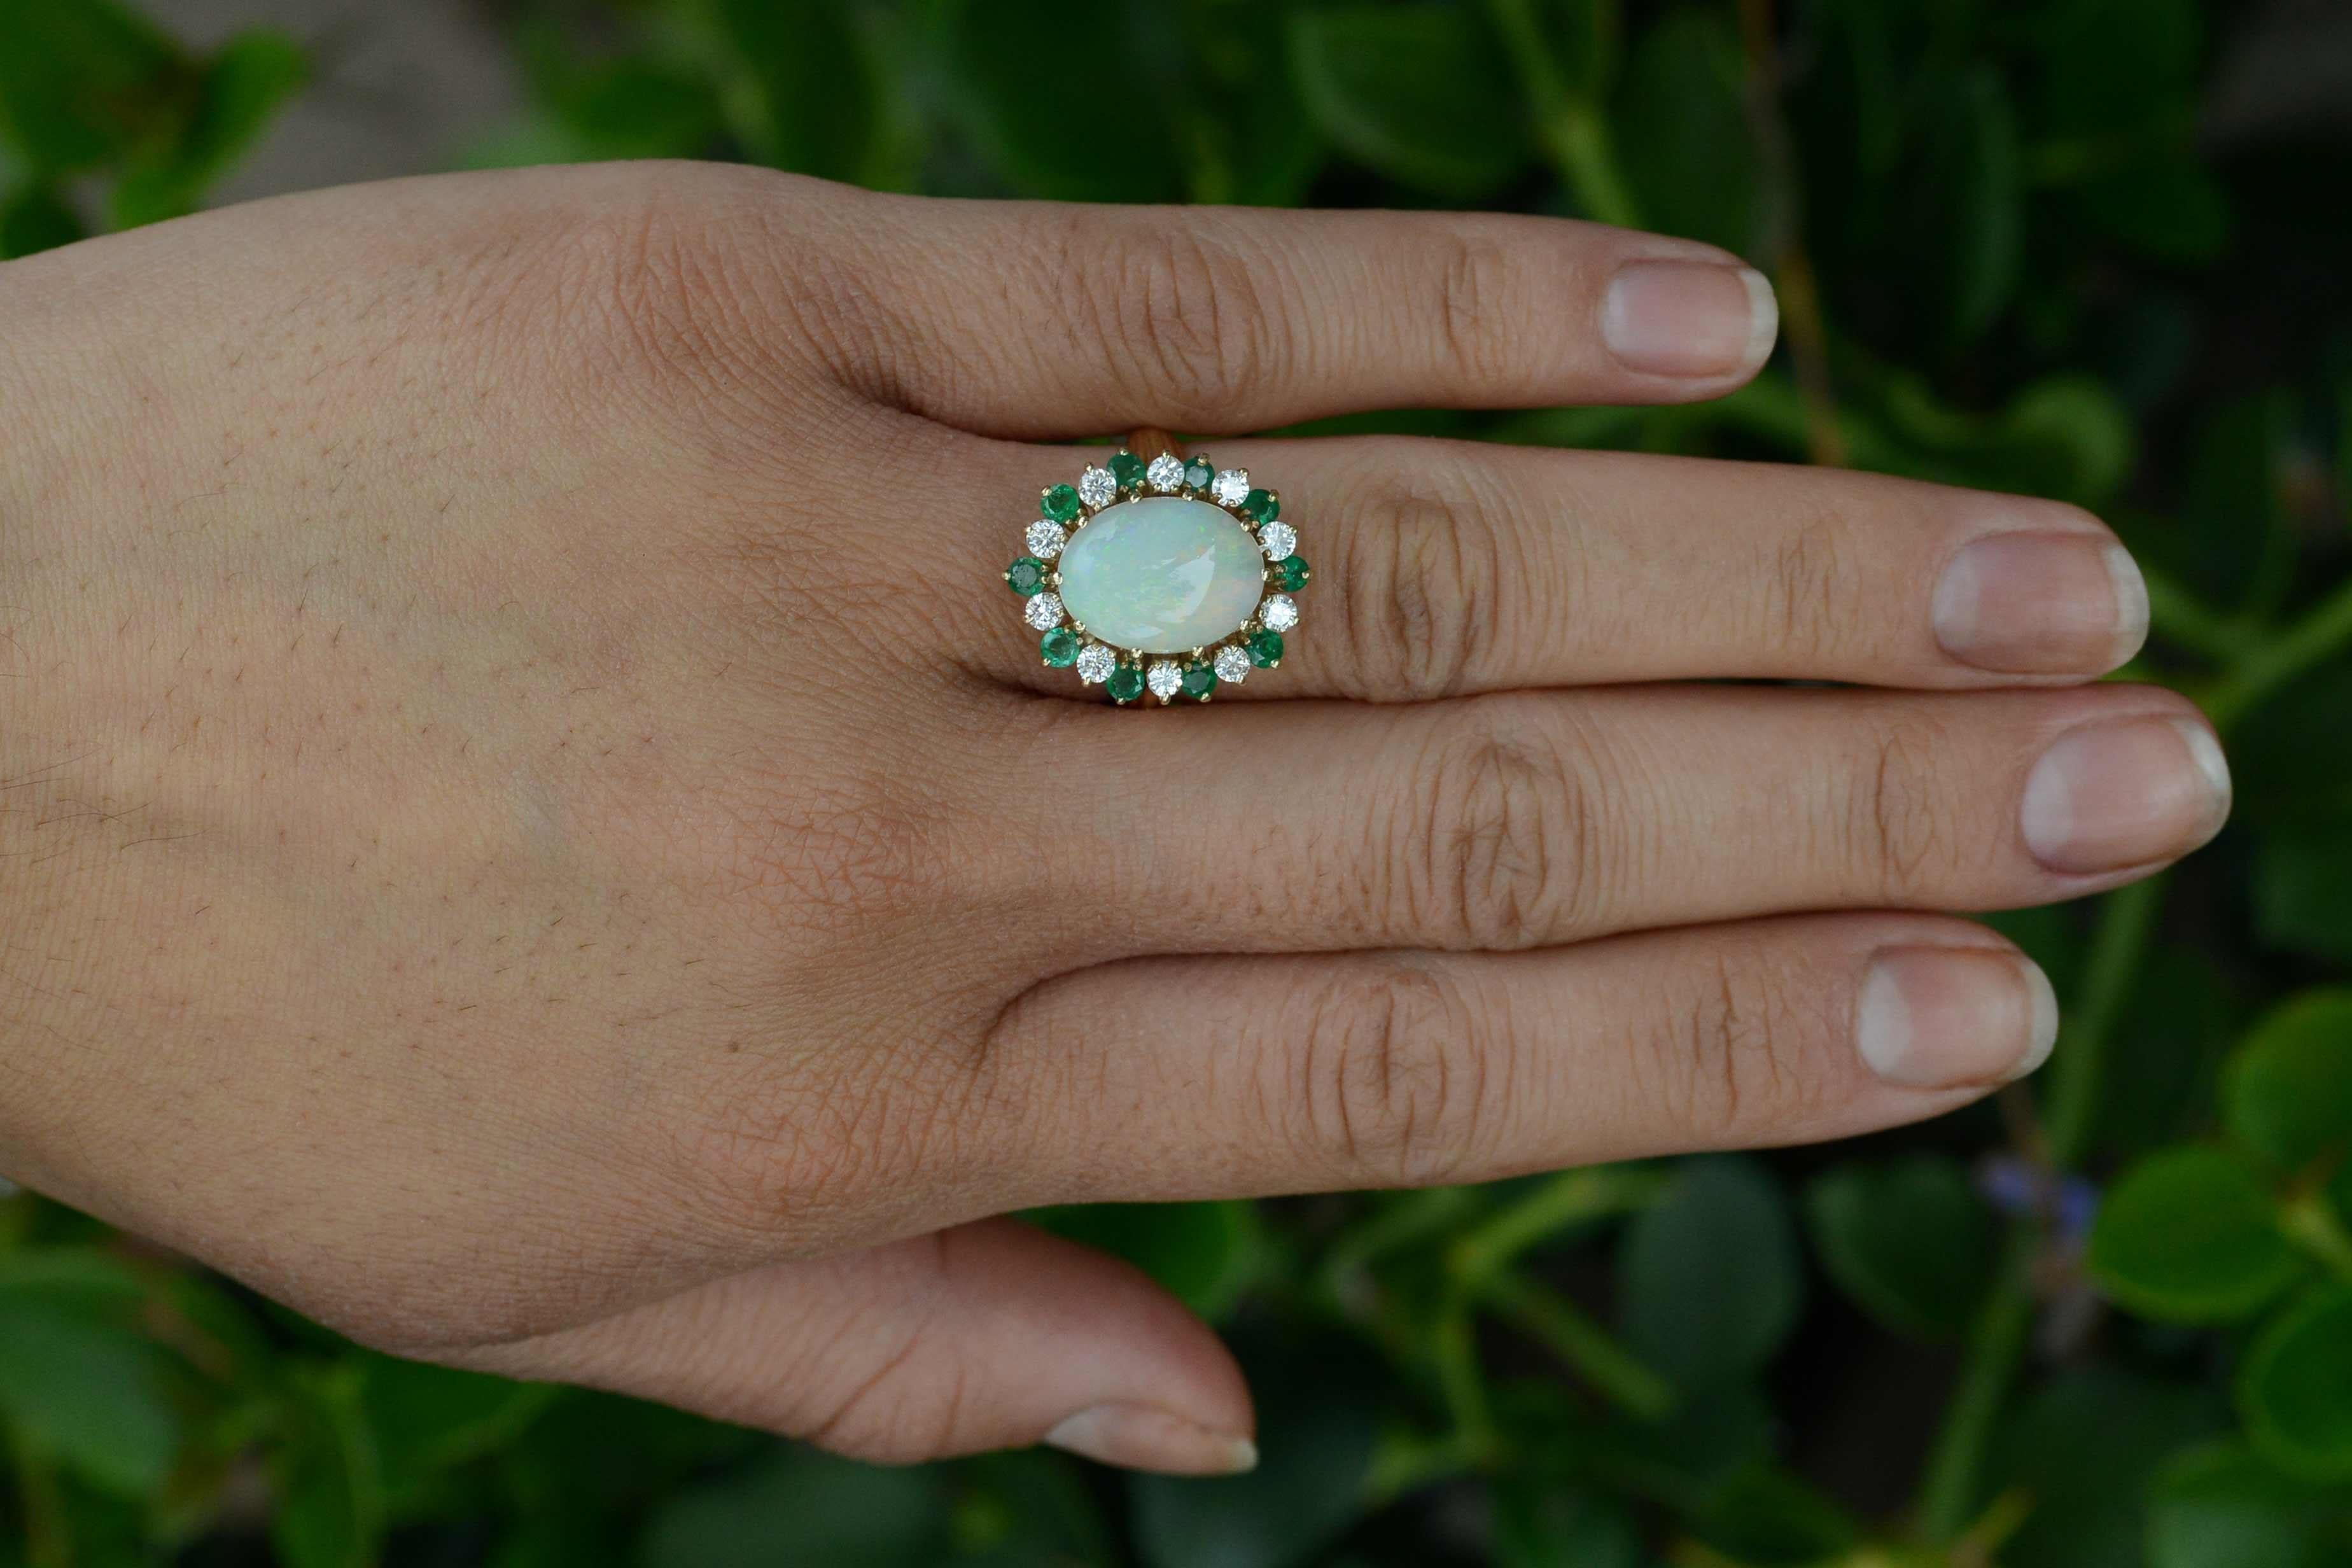 A swoon-worthy Mid Century dome cocktail ring with a dynamic, gorgeous, fiery pinfire opal at it's heart. The sizable 4 Carat gemstone glows with an inner fire, having a dynamic play-of-color, emitting rolling flashes of greens, yellows, pinks and